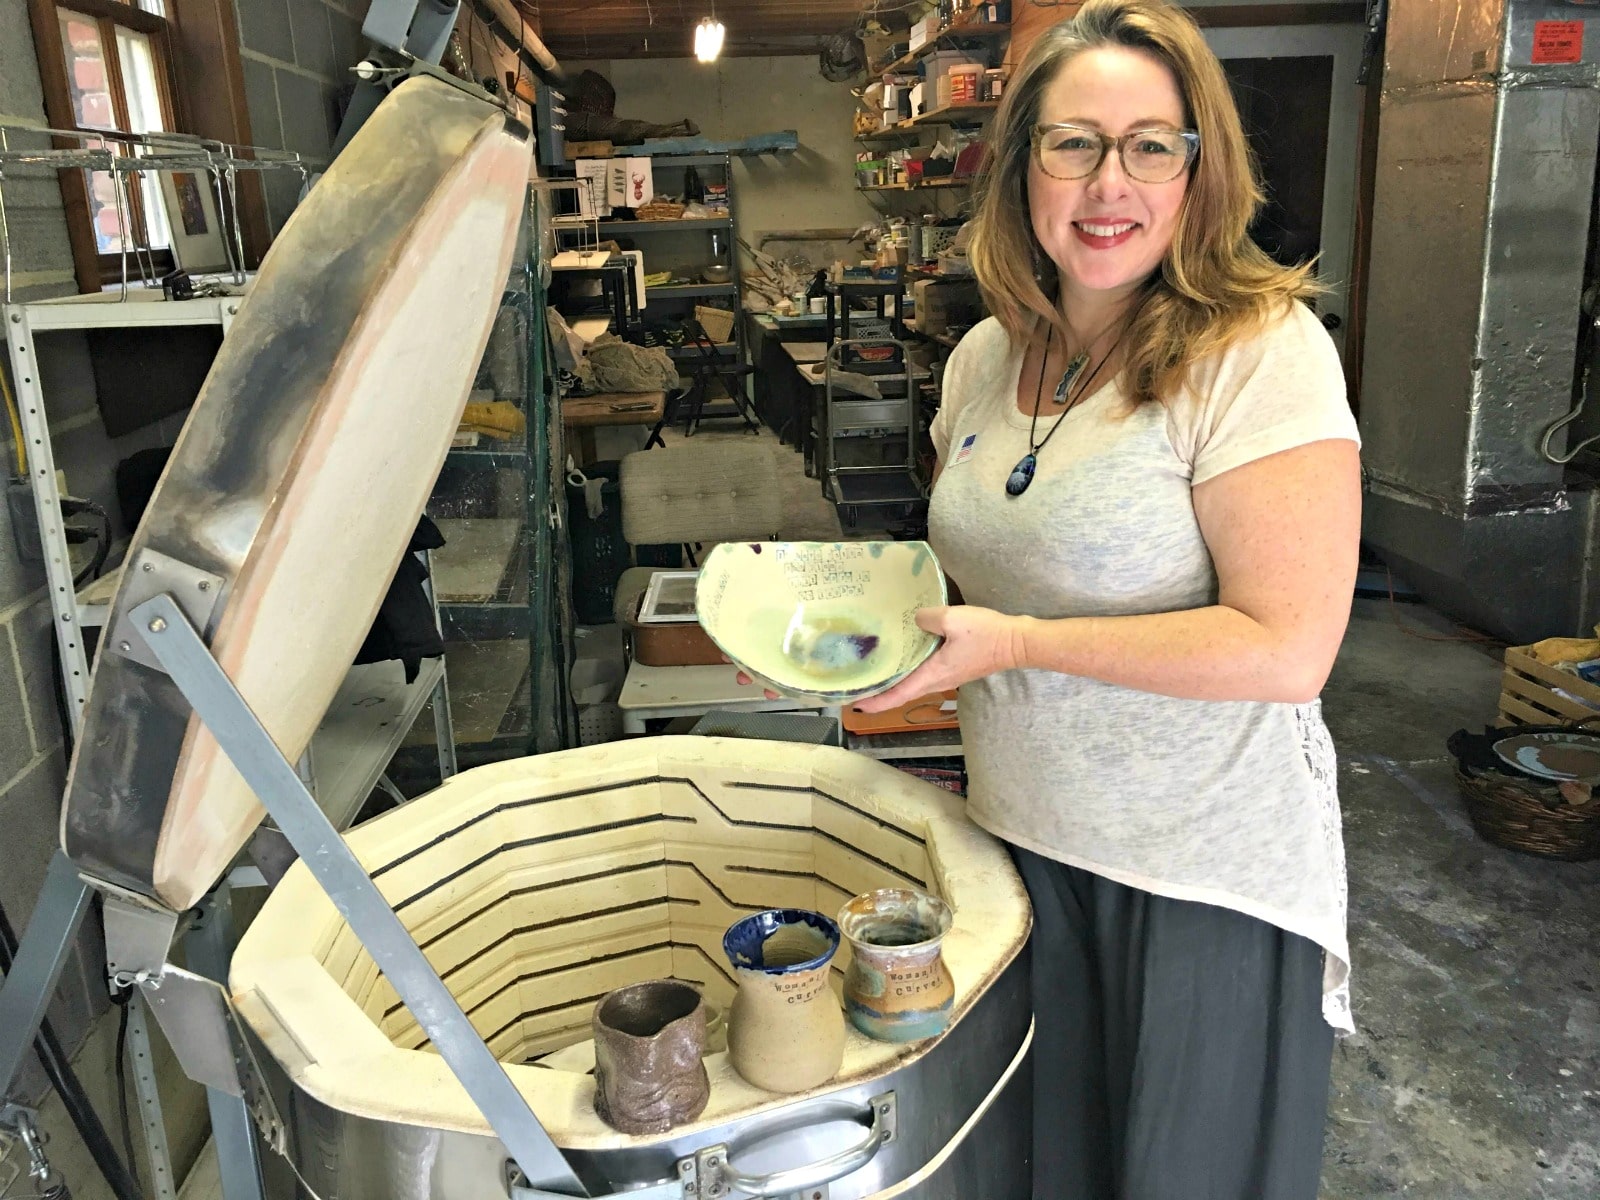 One of the Roebuck Springs potters, Nichole Lariscy Moore, with finished work near her kiln. 